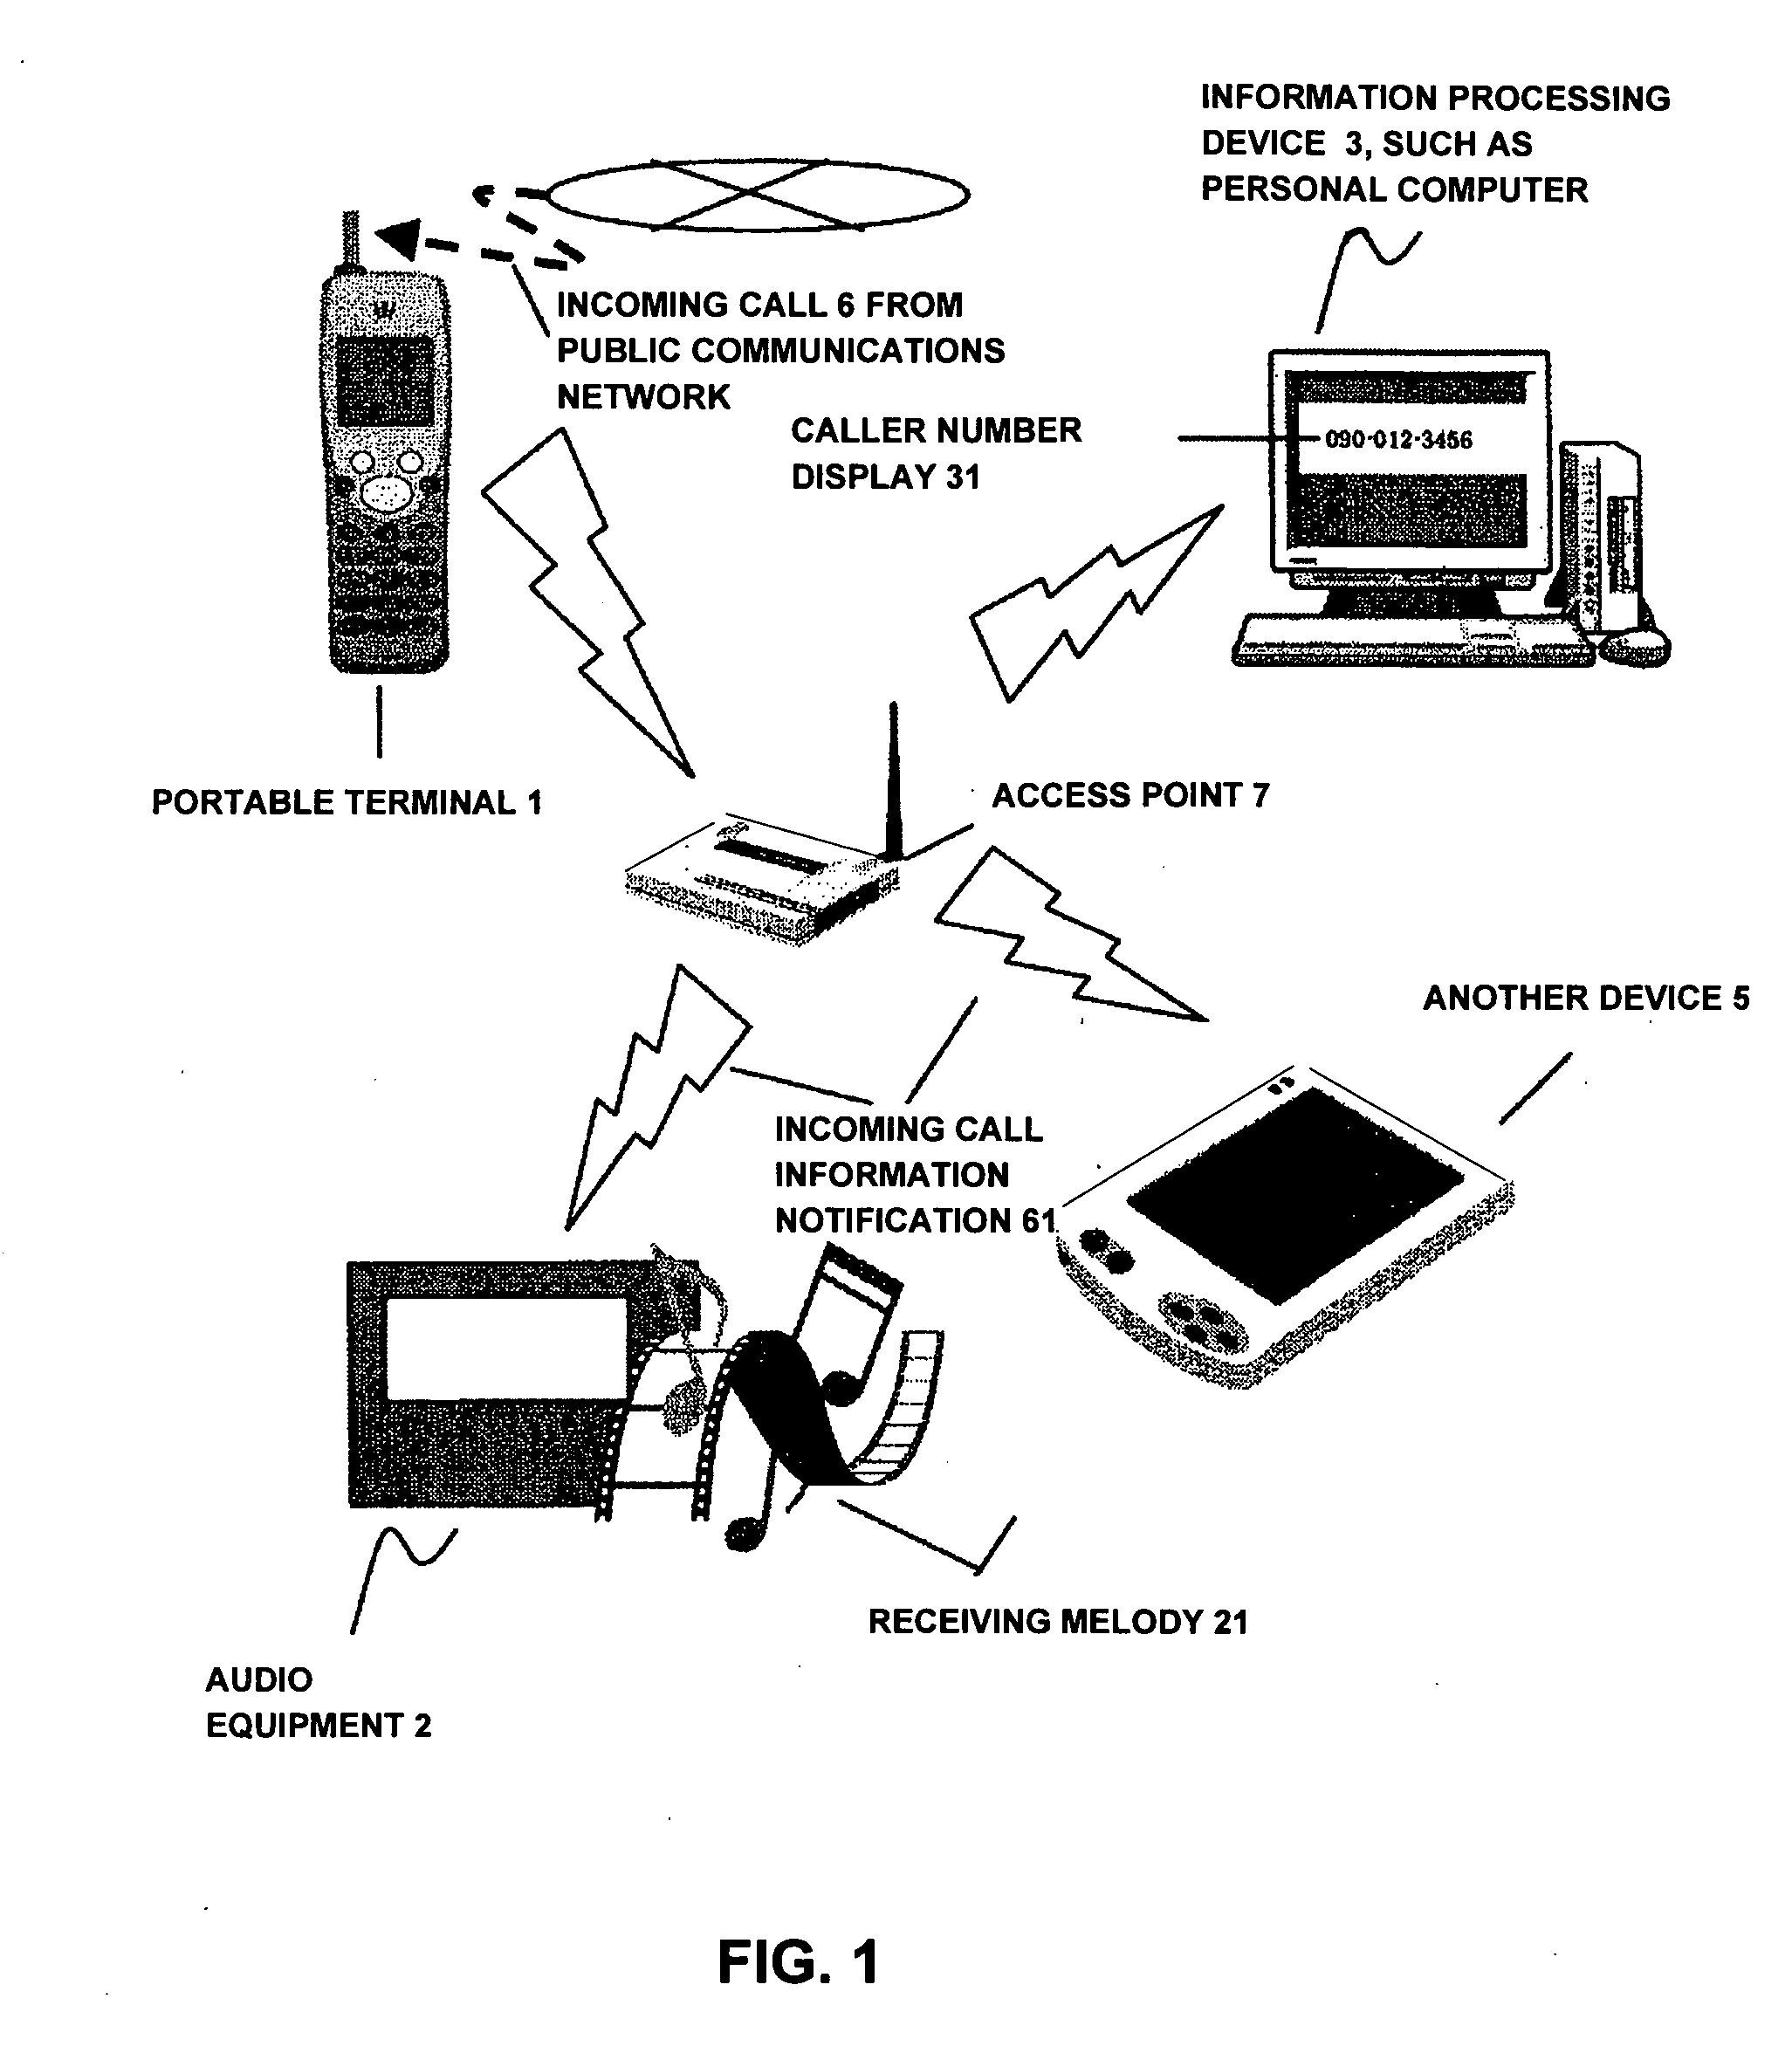 Incoming call notification system and method